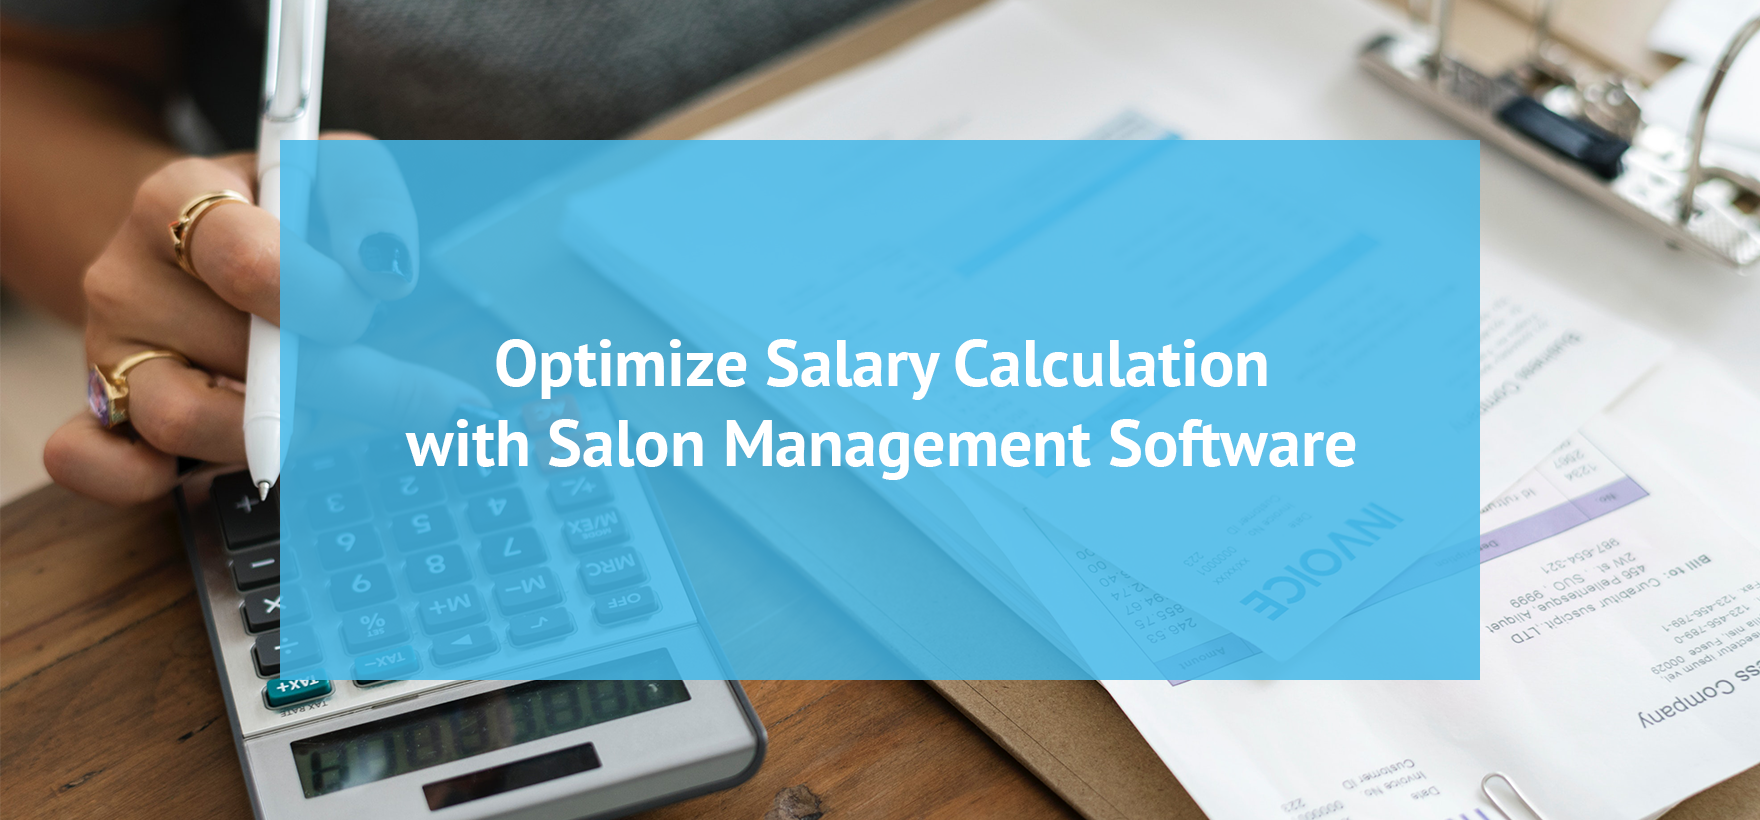 Optimize Salary Calculation with Salon Management Software